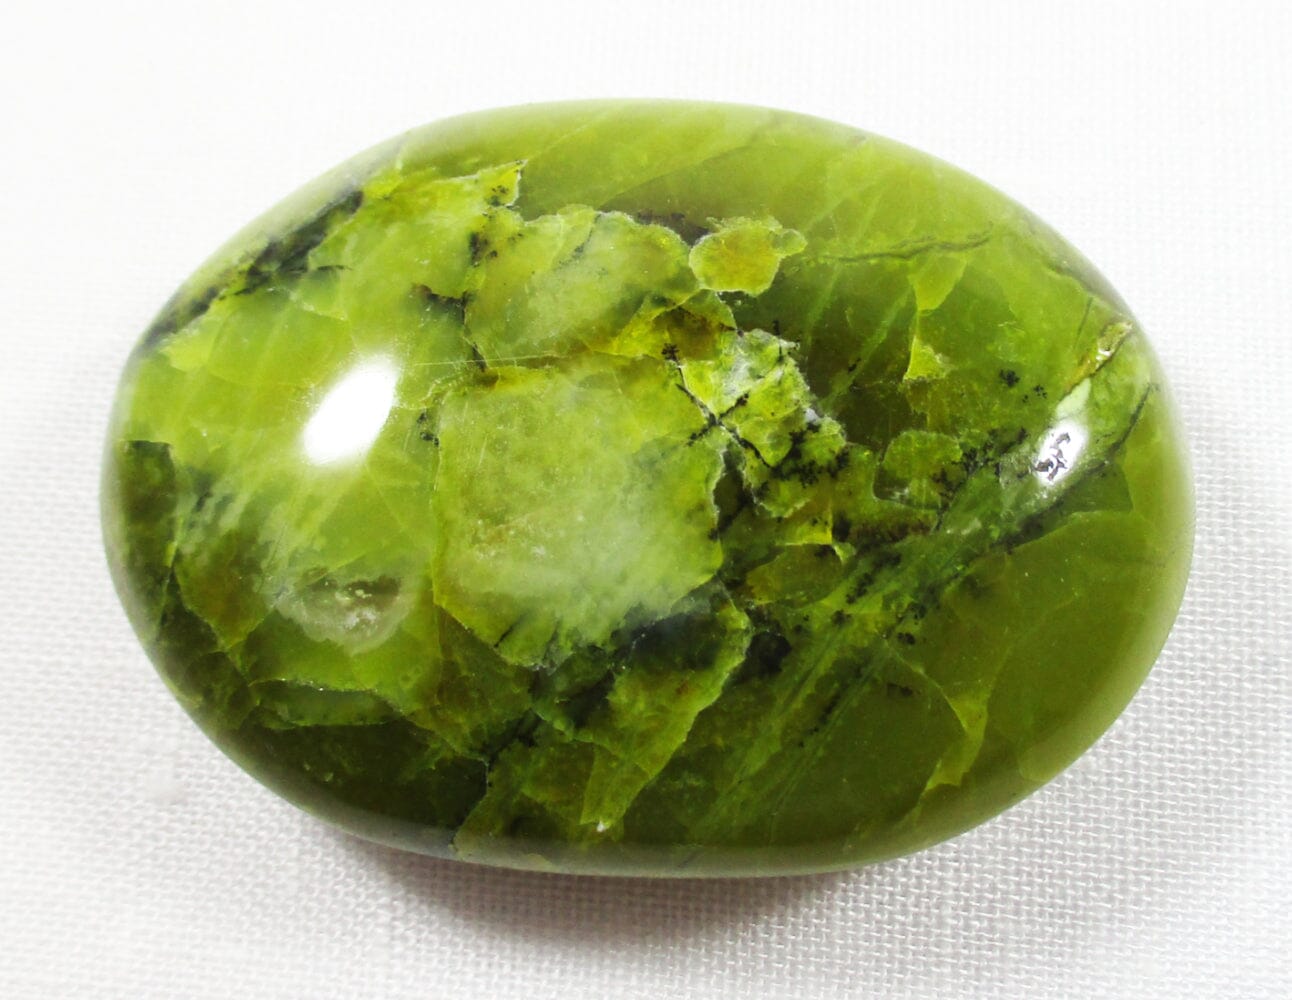 Green Opal Palm Pebble - Cut & Polished Crystals > Polished Crystal Palm Stones